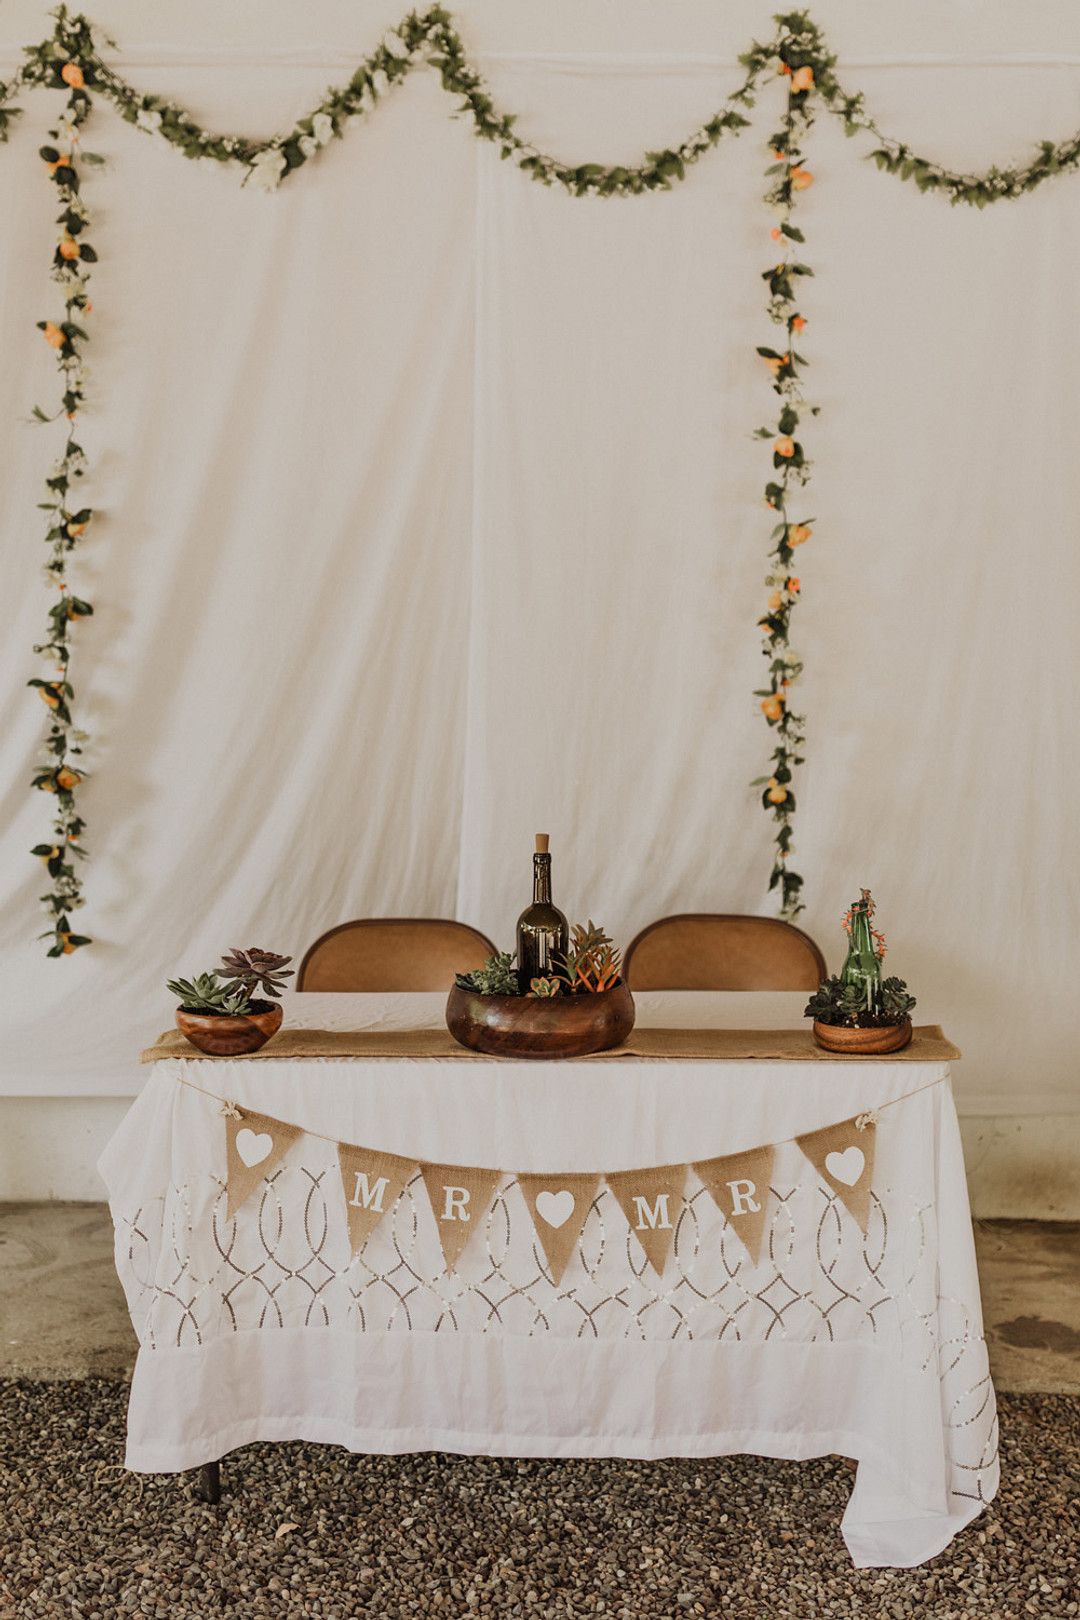 sweetheart table seating at an intimate rustic farm wedding